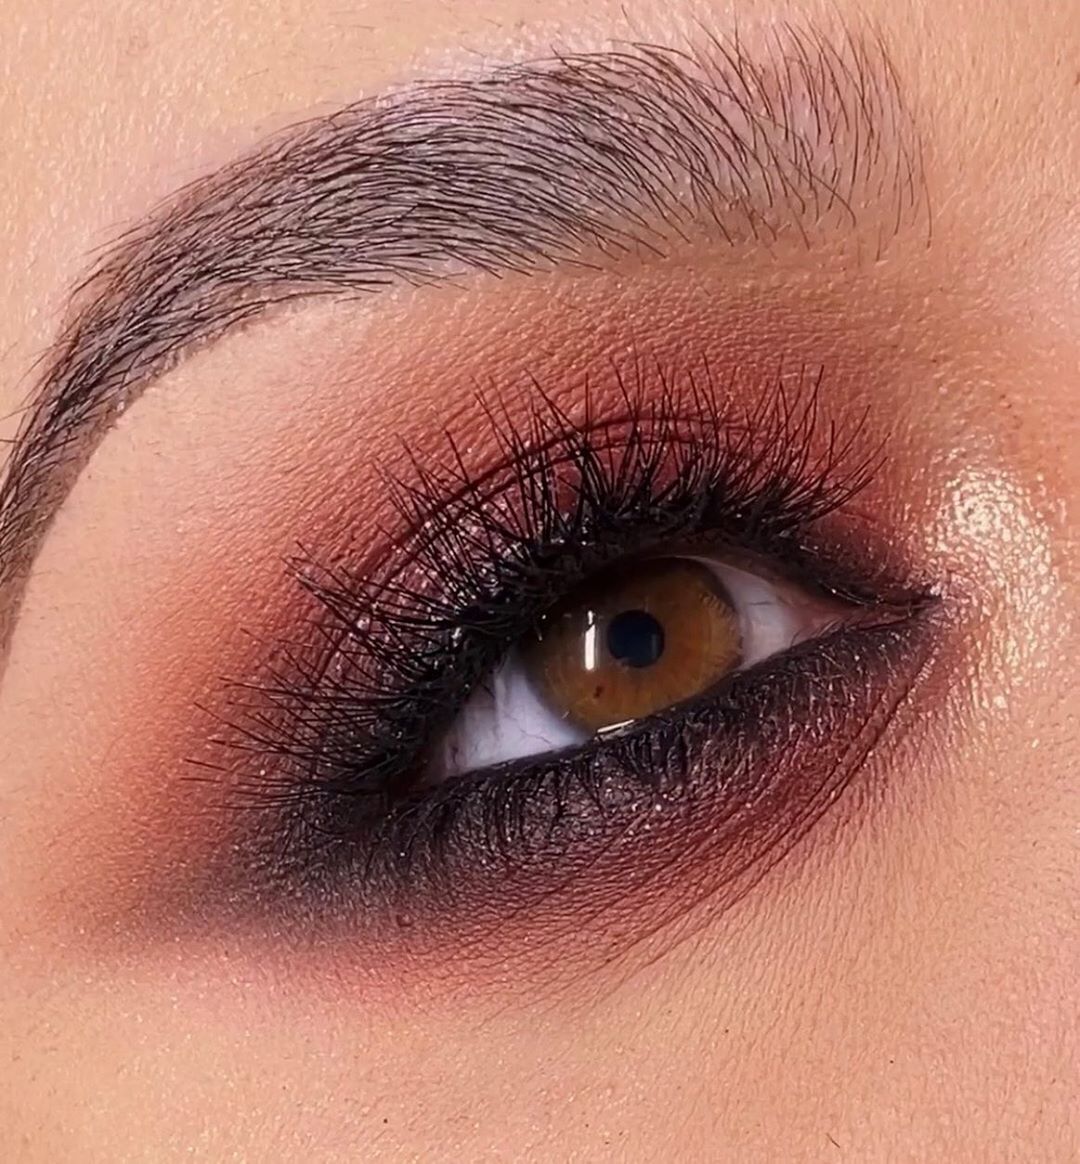 DOSE of COLORS - FALL LAYERING USING OUR SMOKEY SOIRÉE EYESHADOW PALETTE 🥀
.
CREASE & LID: FIRED UP + ON THE ROCKS 
OUTER V: MIDNIGHT + OUT & ABOUT
LOWER LASH LINE: FIRED UP + ON THE ROCKS + MIDNIGHT...